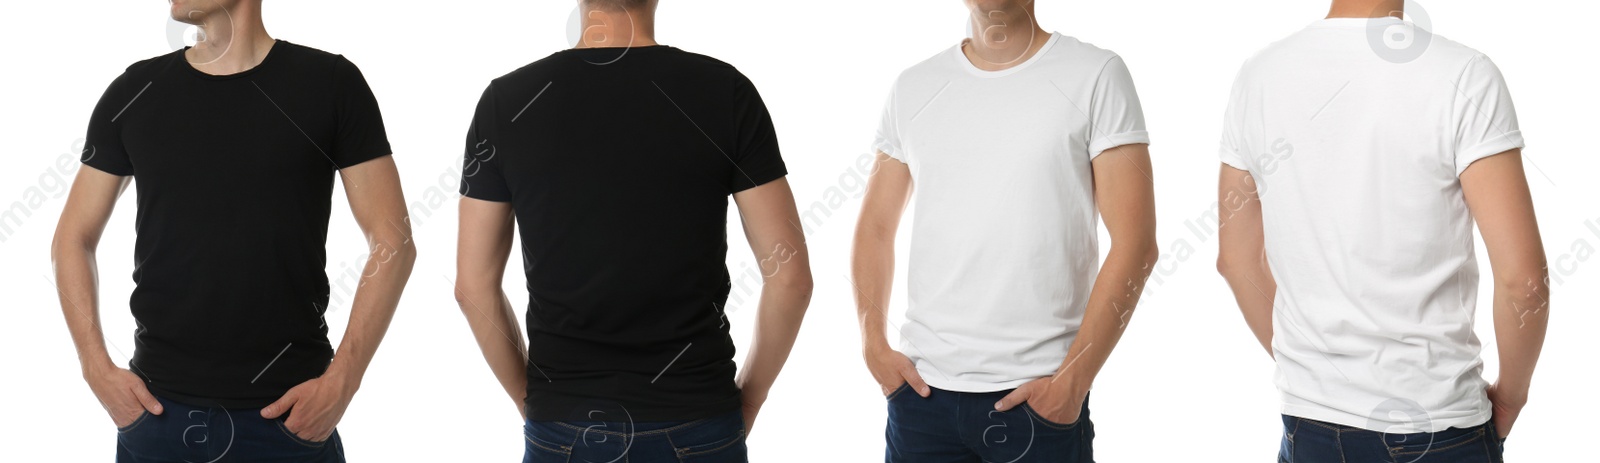 Image of Men in t-shirts on white background, closeup with back and front view. Mockup for design